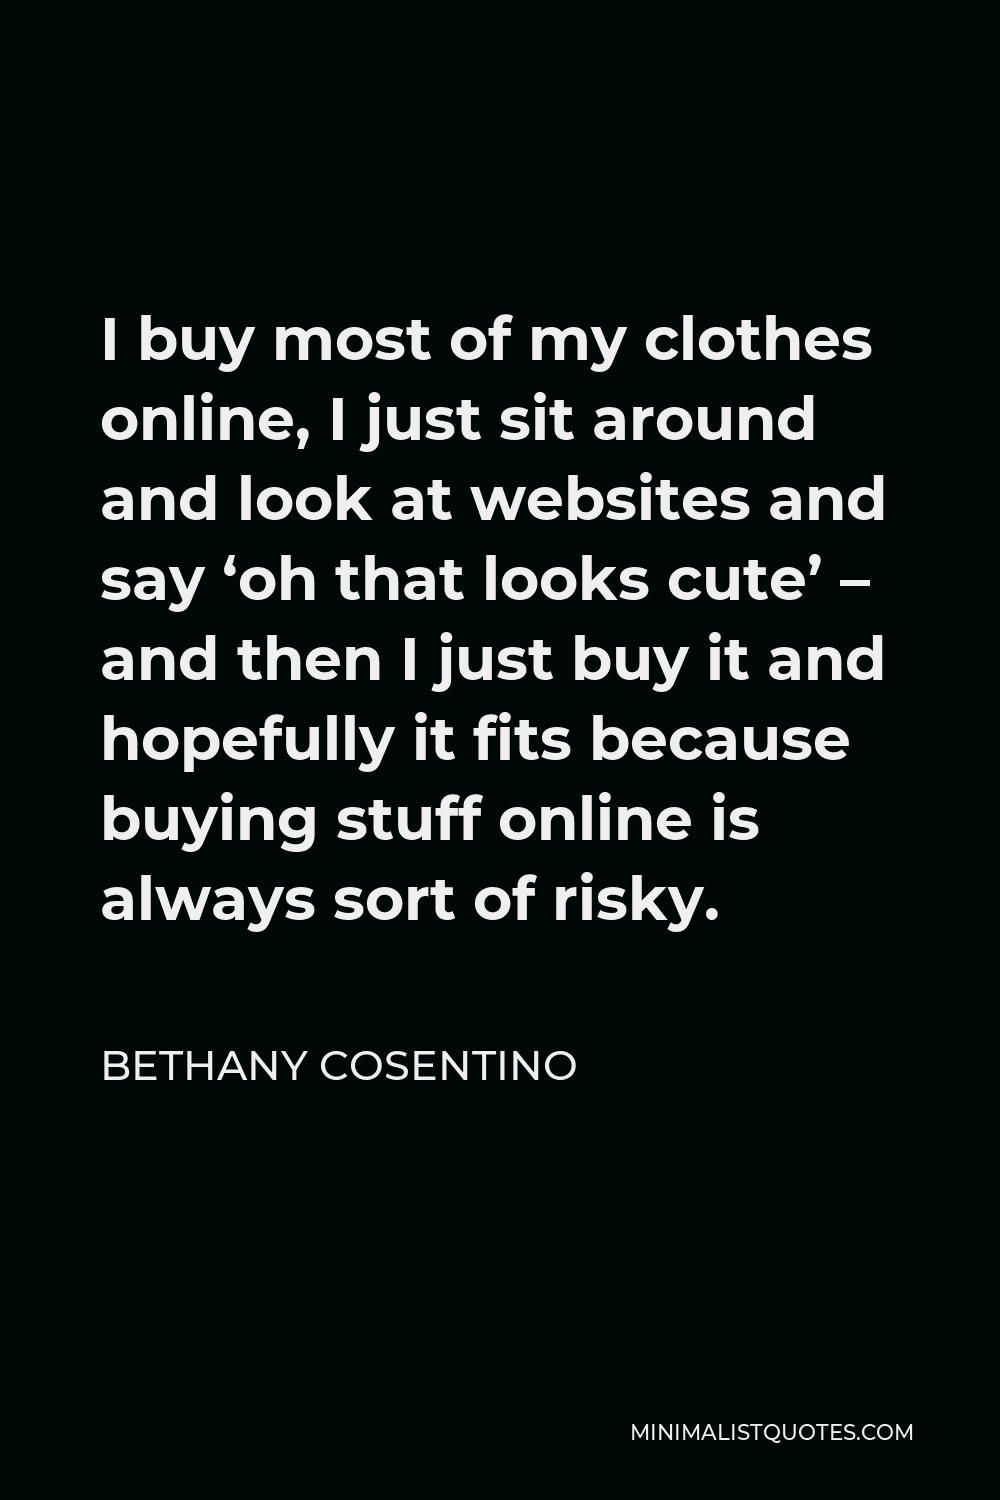 Bethany Cosentino Quote - I buy most of my clothes online, I just sit around and look at websites and say ‘oh that looks cute’ – and then I just buy it and hopefully it fits because buying stuff online is always sort of risky.